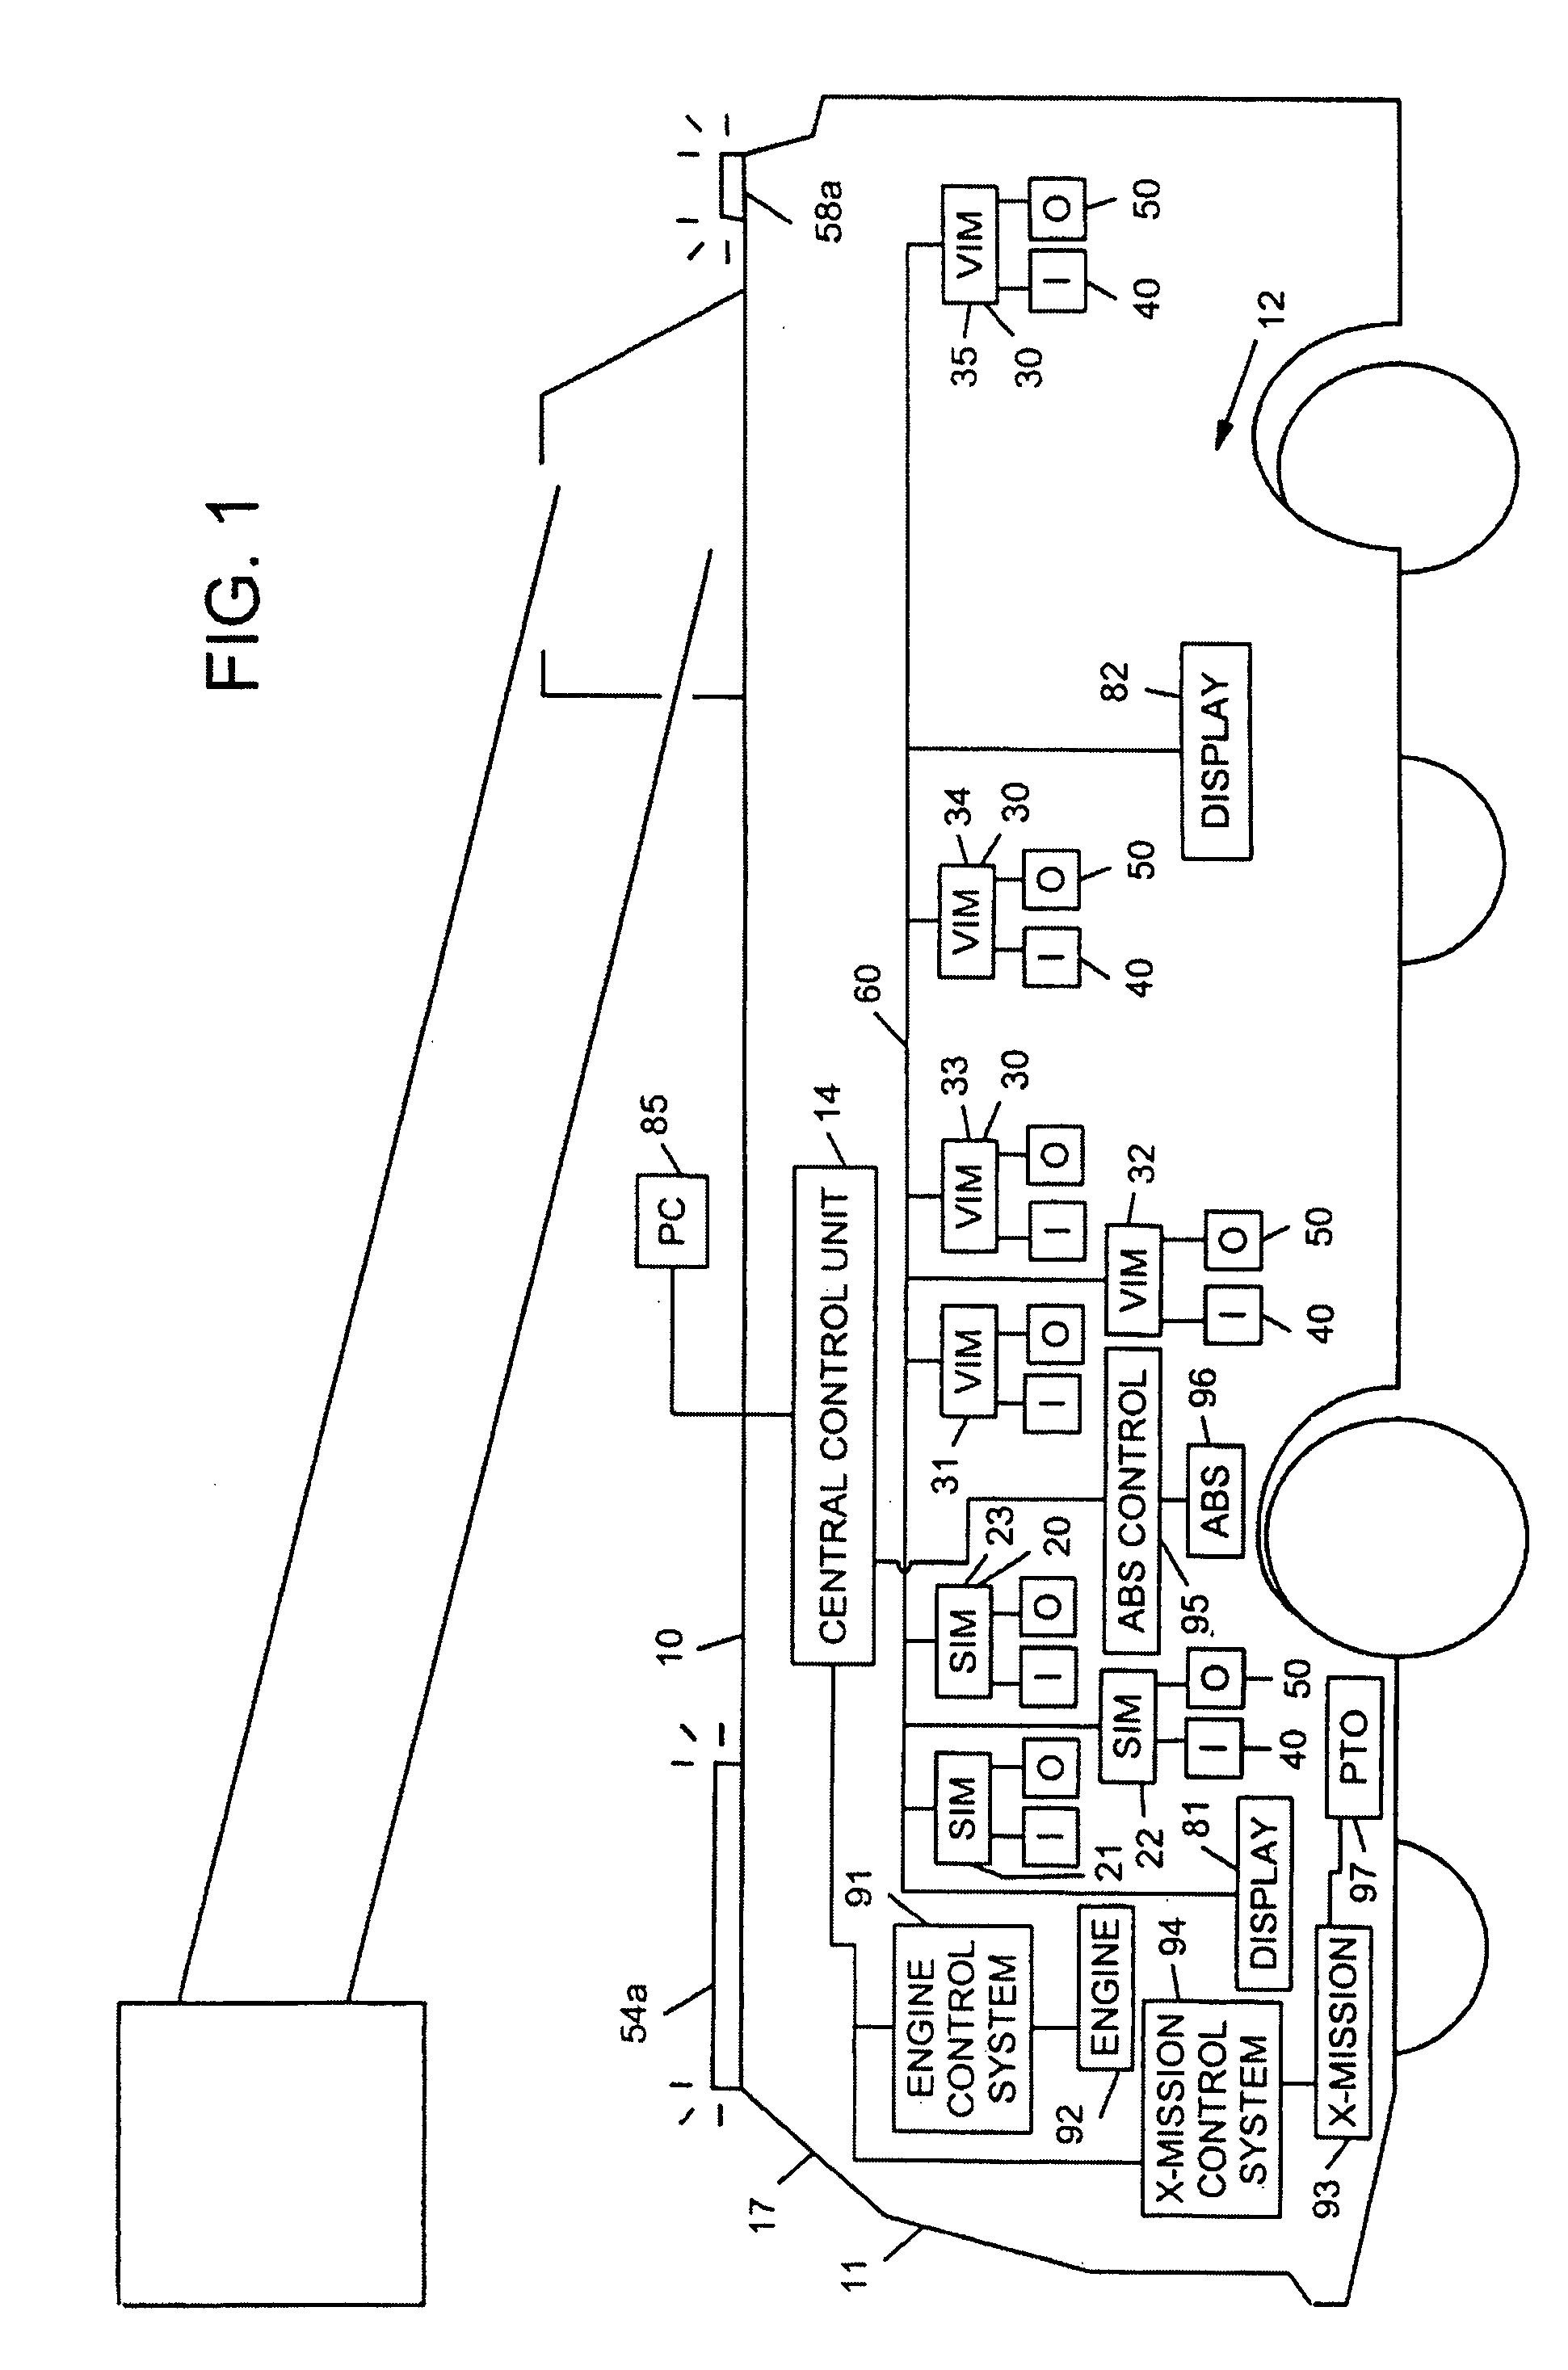 Turret envelope control system and method for a vehicle